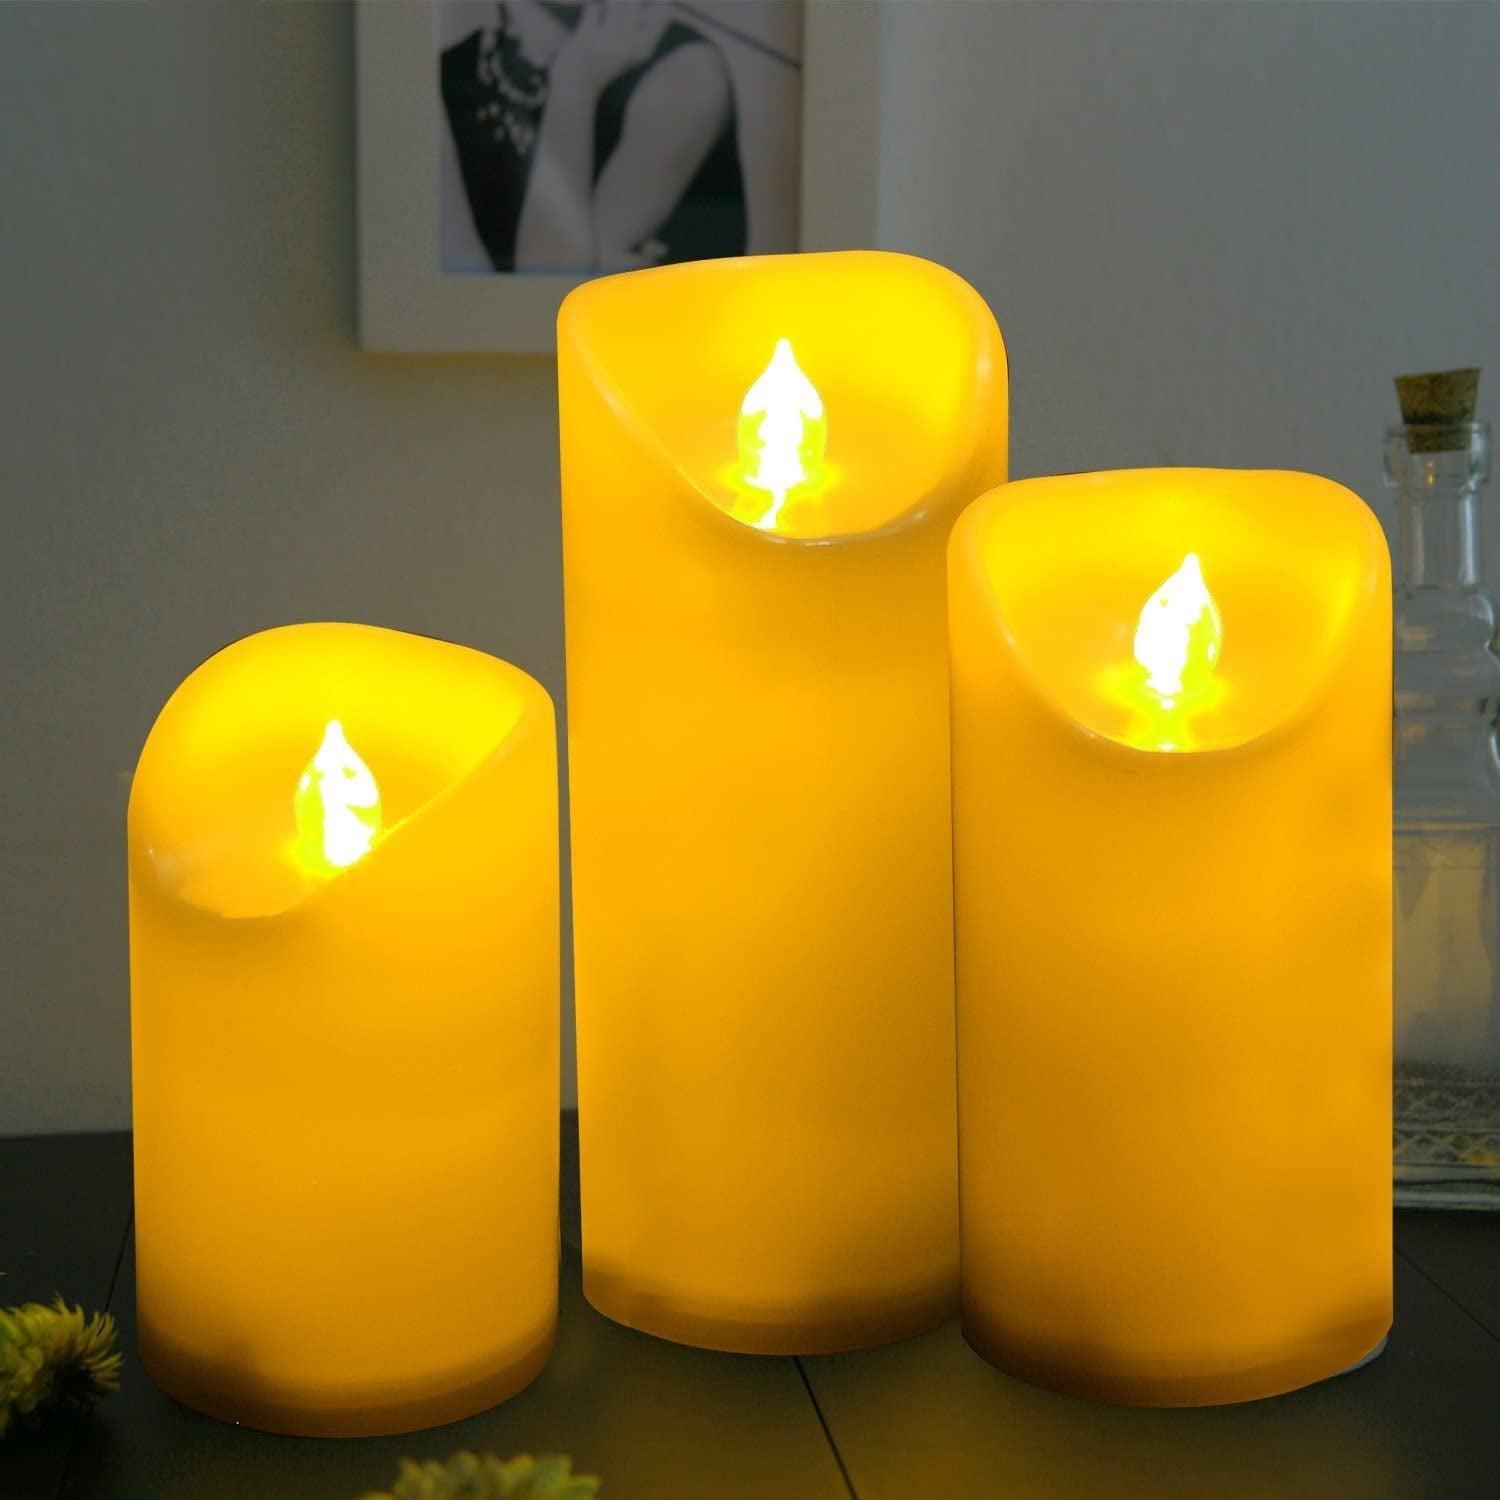 "Waterproof Outdoor Battery Operated Flameless Pillar Candles with Timer - Realistic Flickering LED Lights for Lantern Garden Wedding Christmas Decorations - Pack of 3"